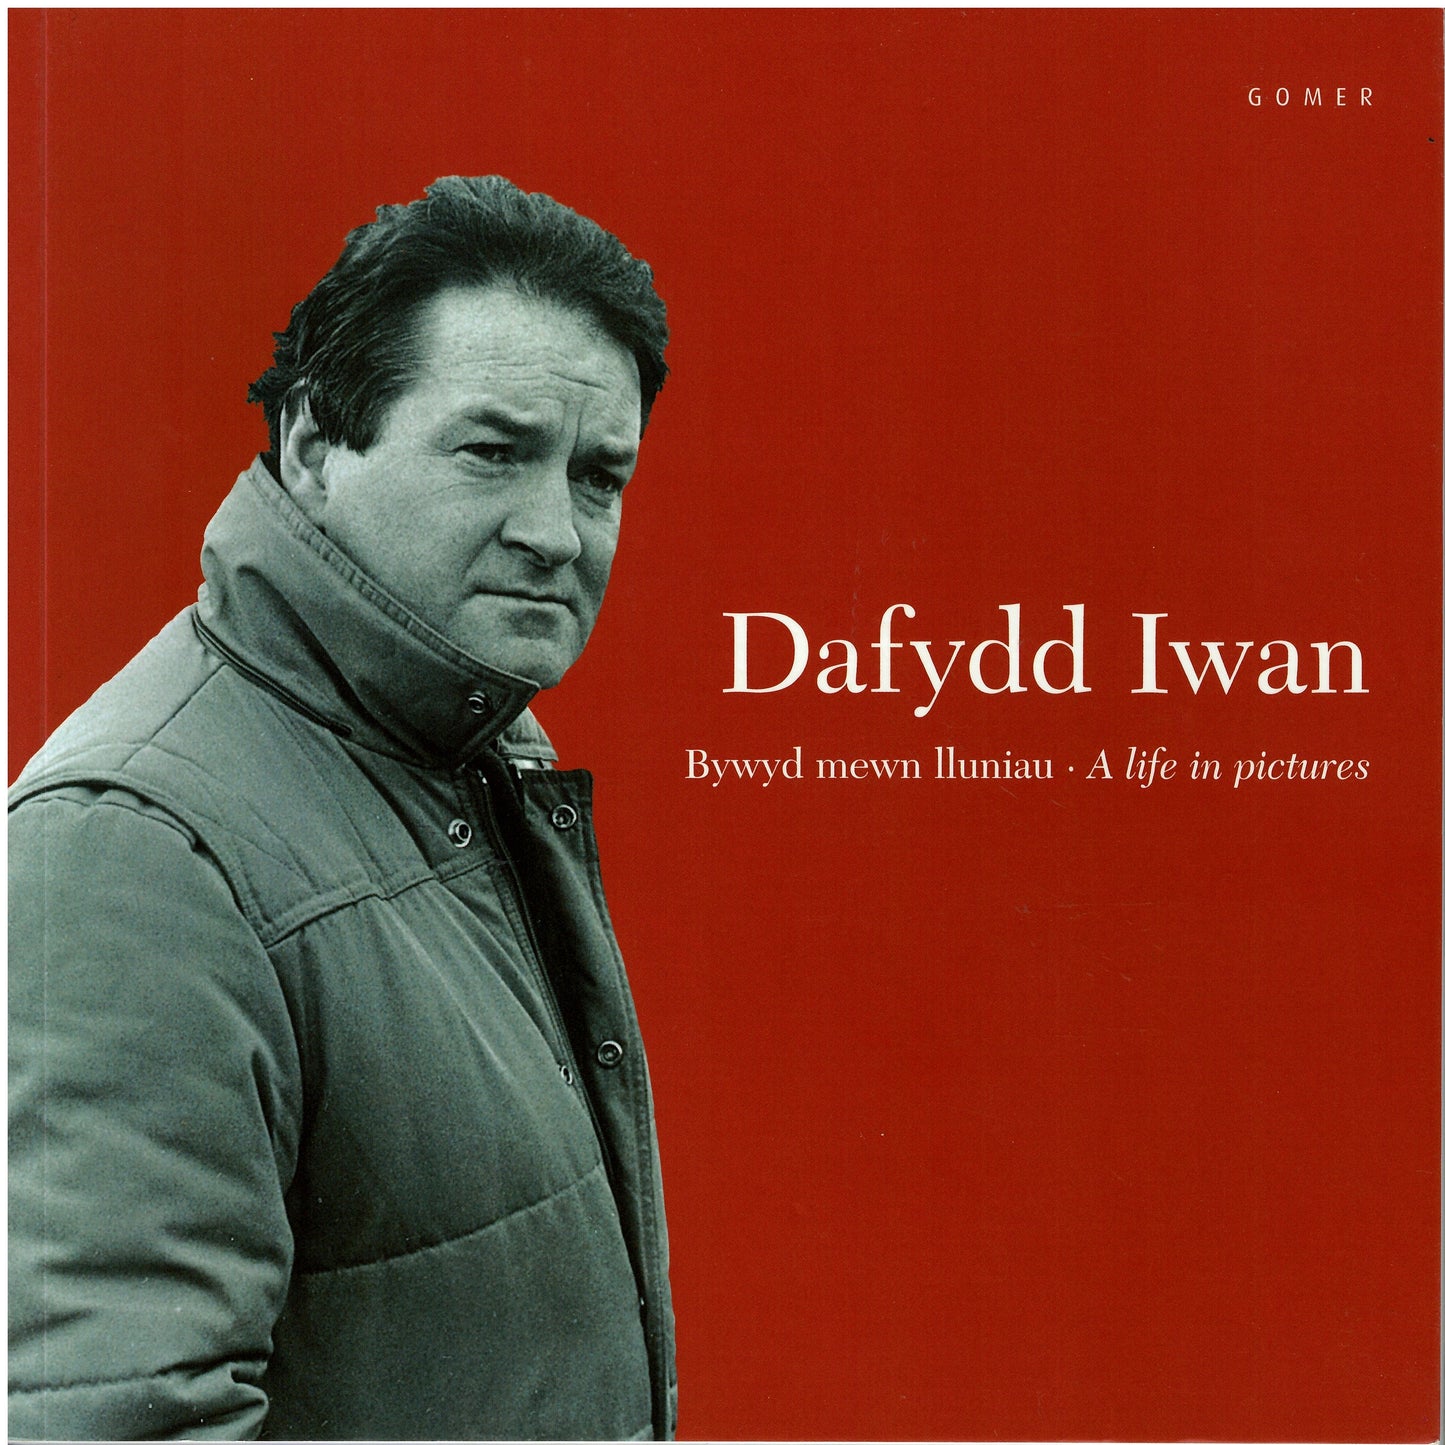 Dafydd Iwan - A life in pictures